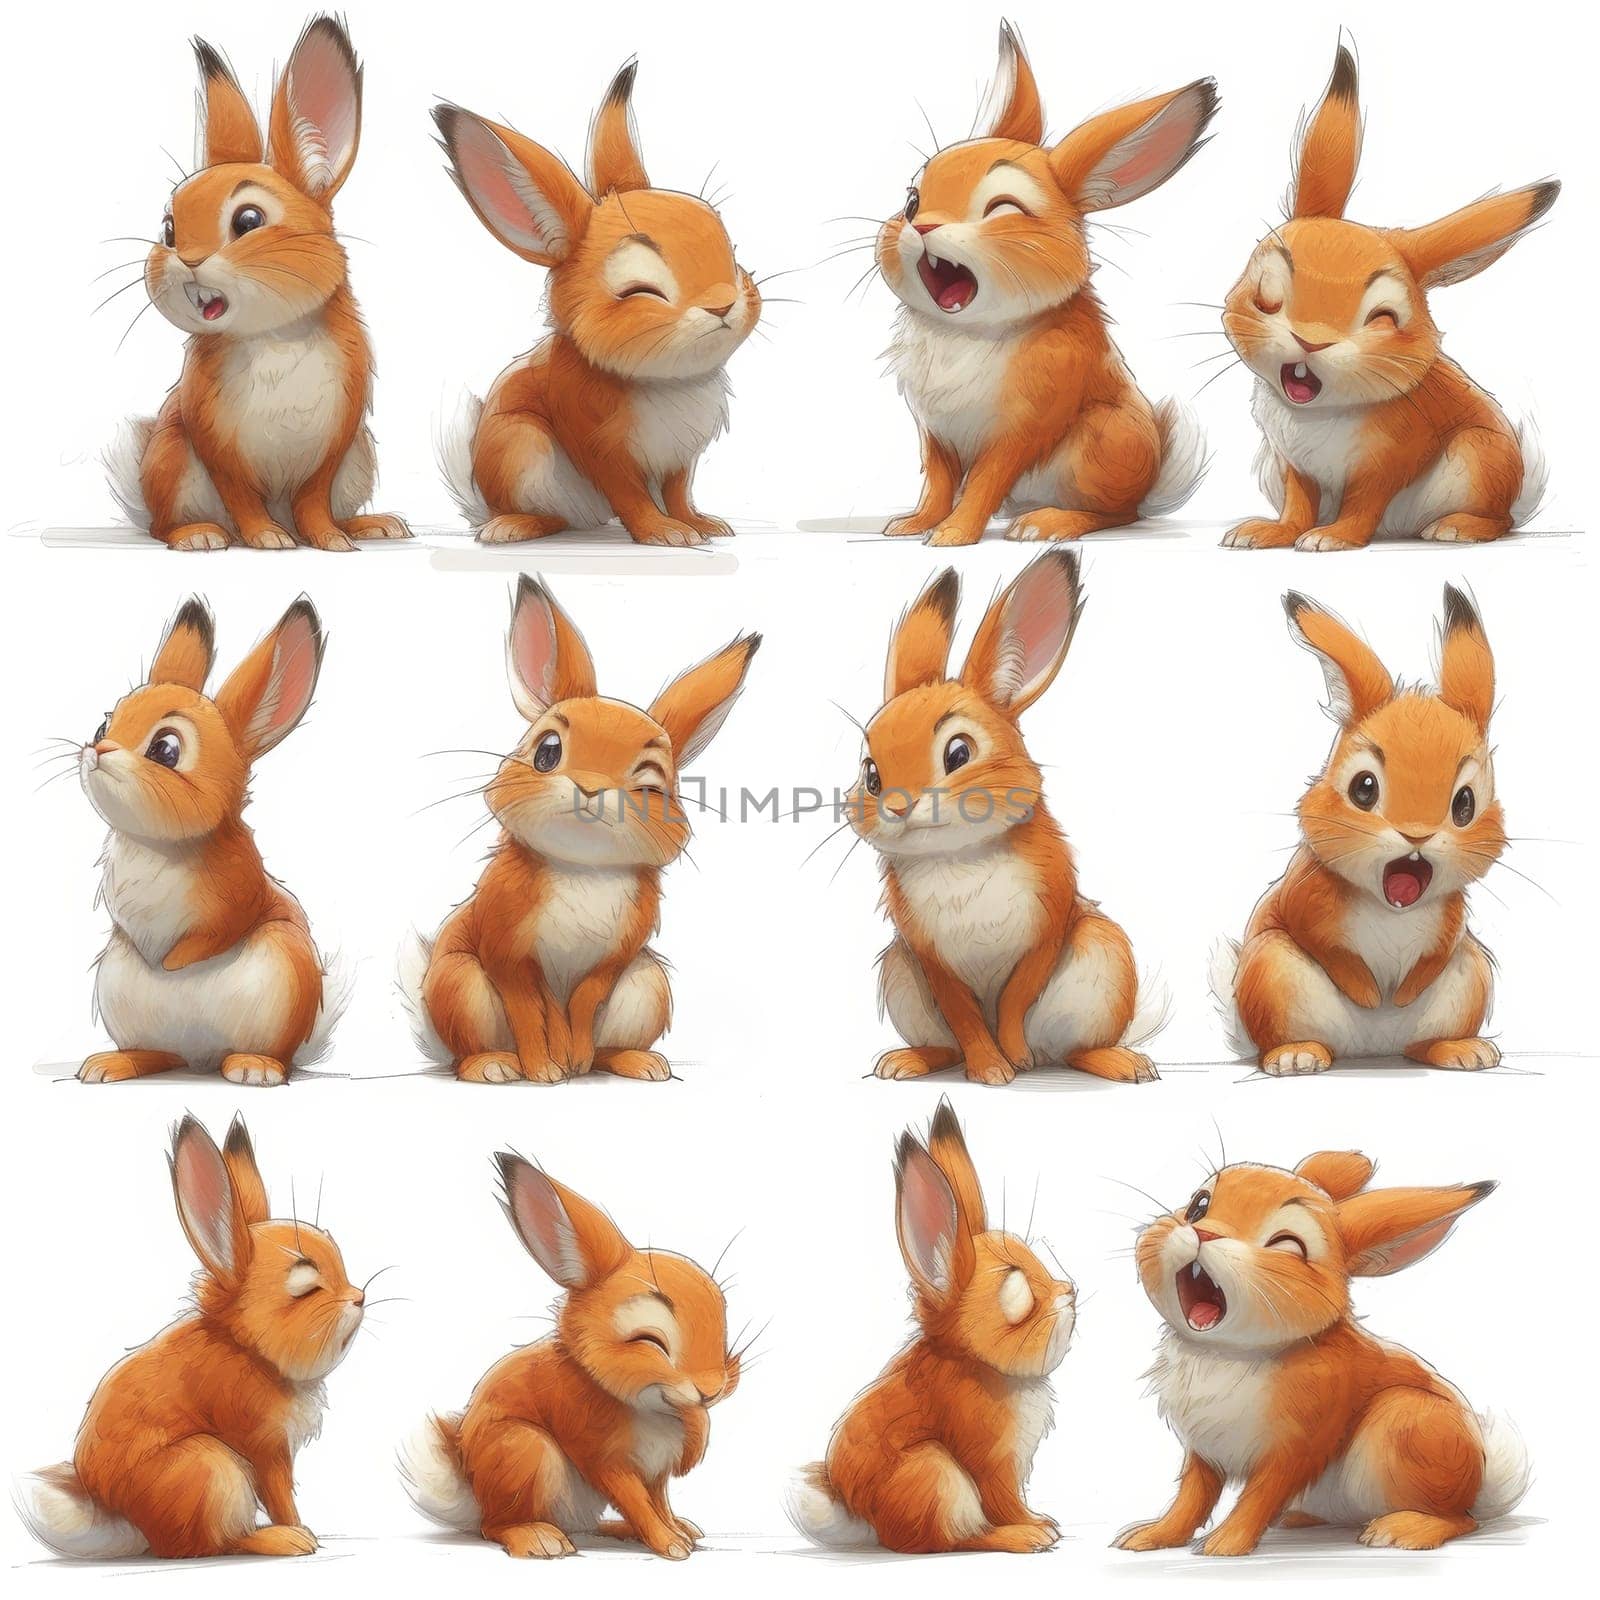 A set of adorable cute red rabbits on a white background by Lobachad